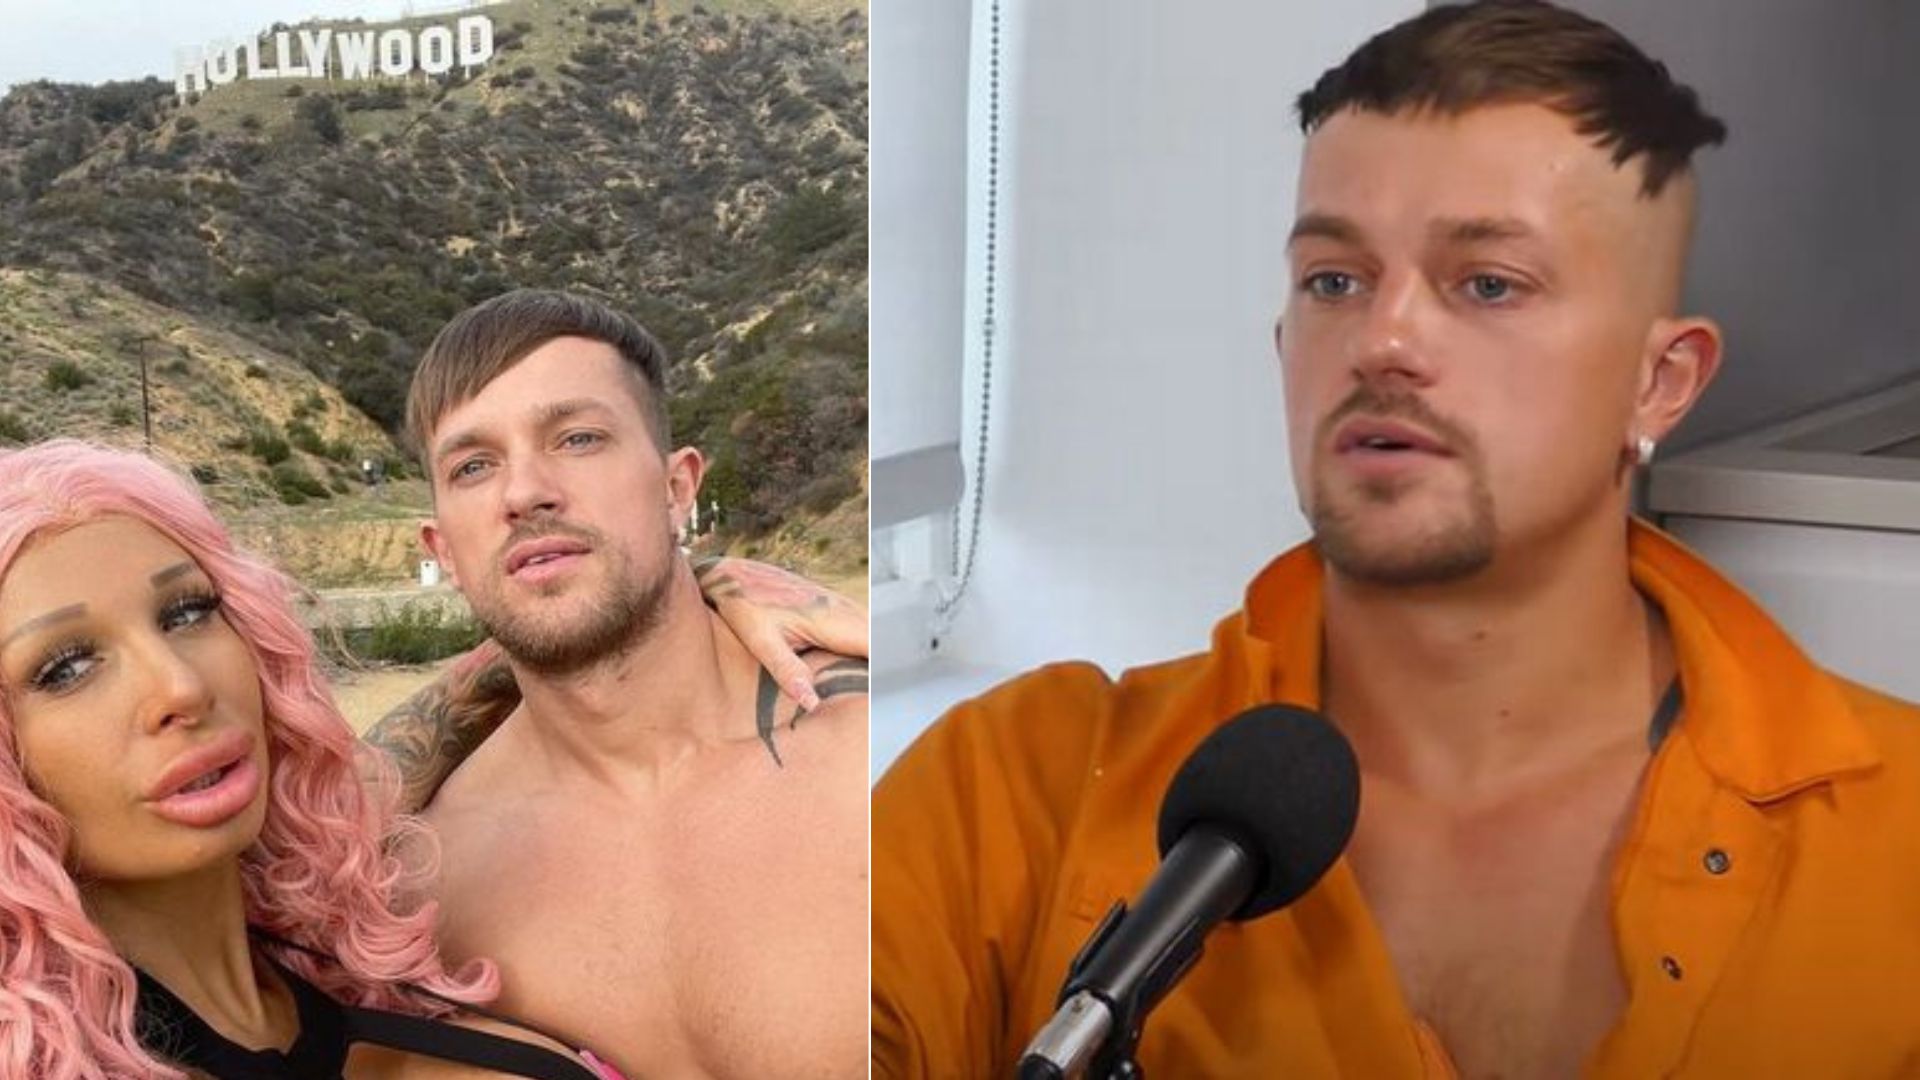 Fun Naked Beach Blondes - Former Crystal Palace man who quit football and became a porn star admits  job isn't as fun as expected | CaughtOffside